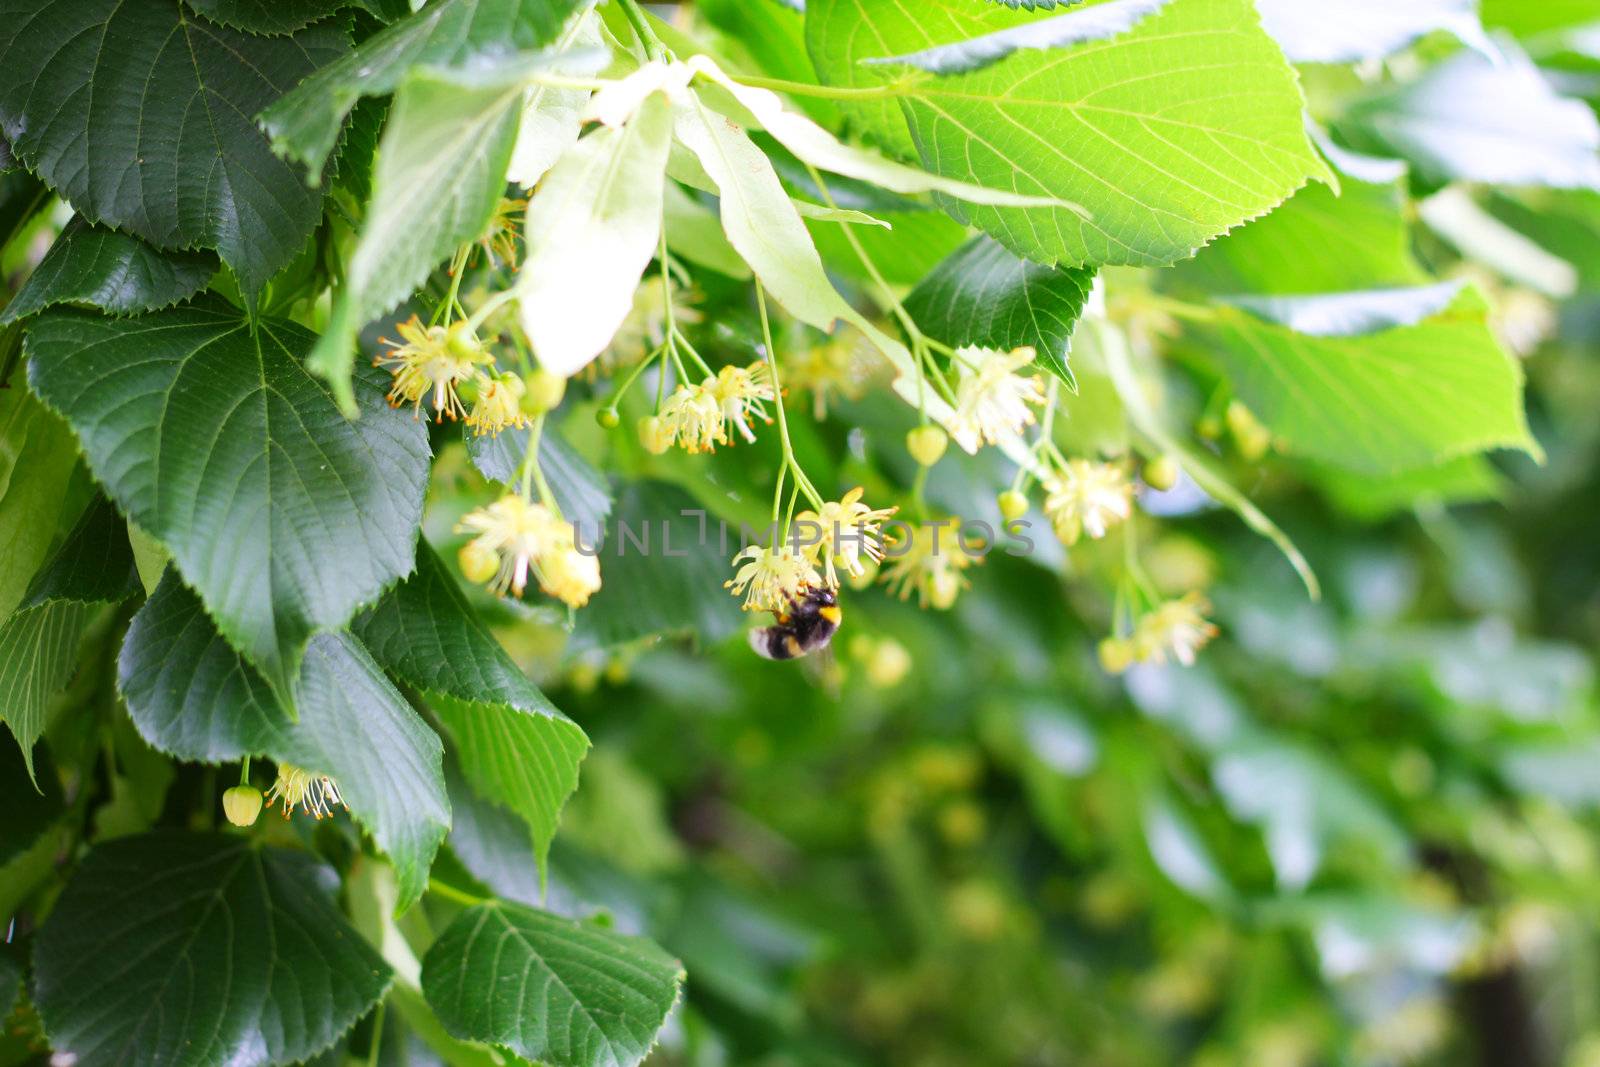 Bee pollinating flowers on linden tree close up